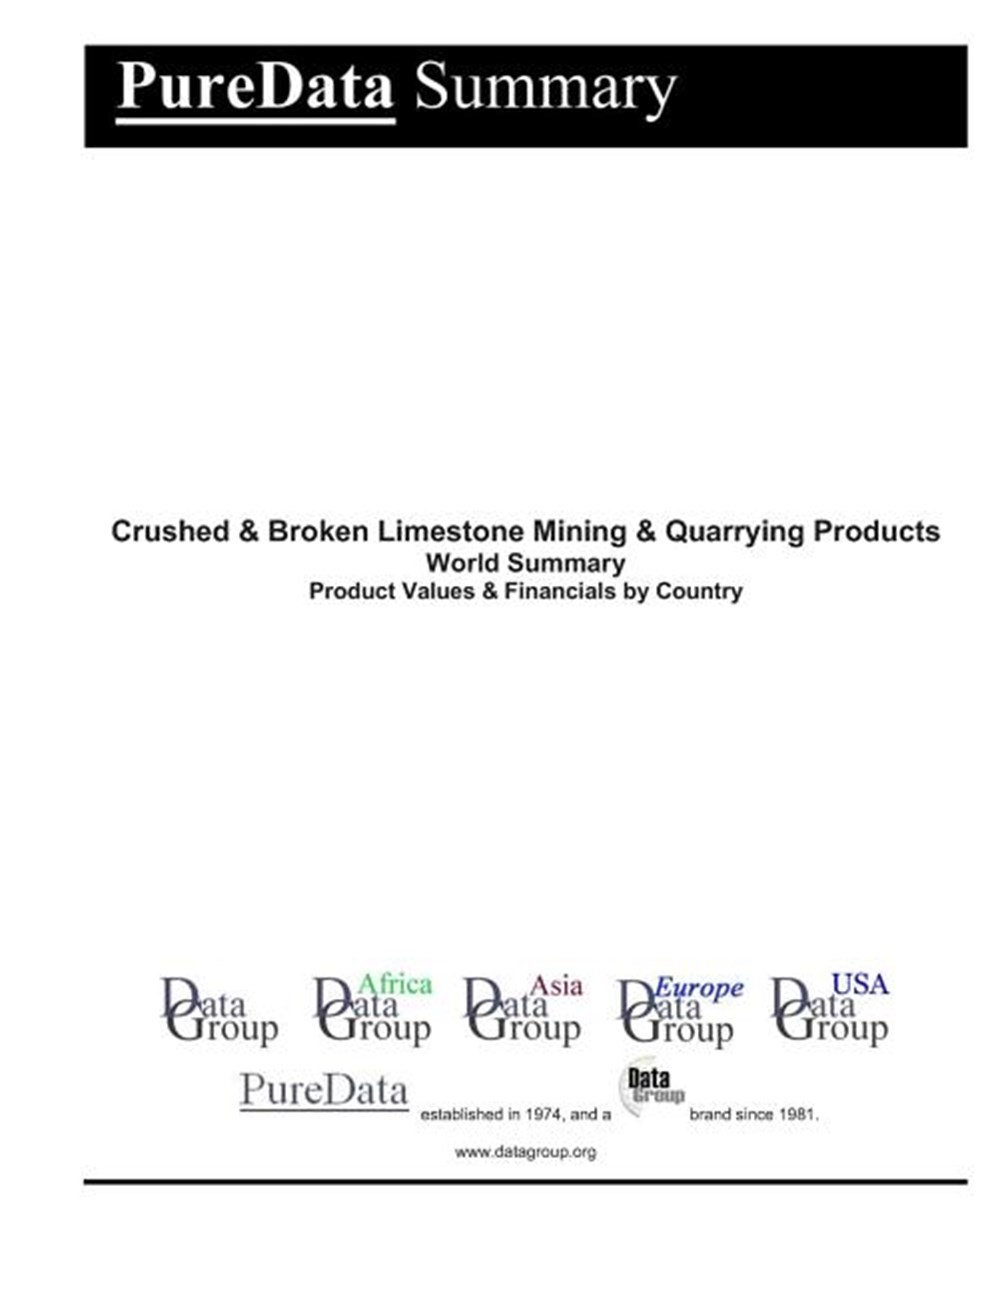 Crushed & Broken Limestone Mining & Quarrying Products World Summary Product Values & Financials by 